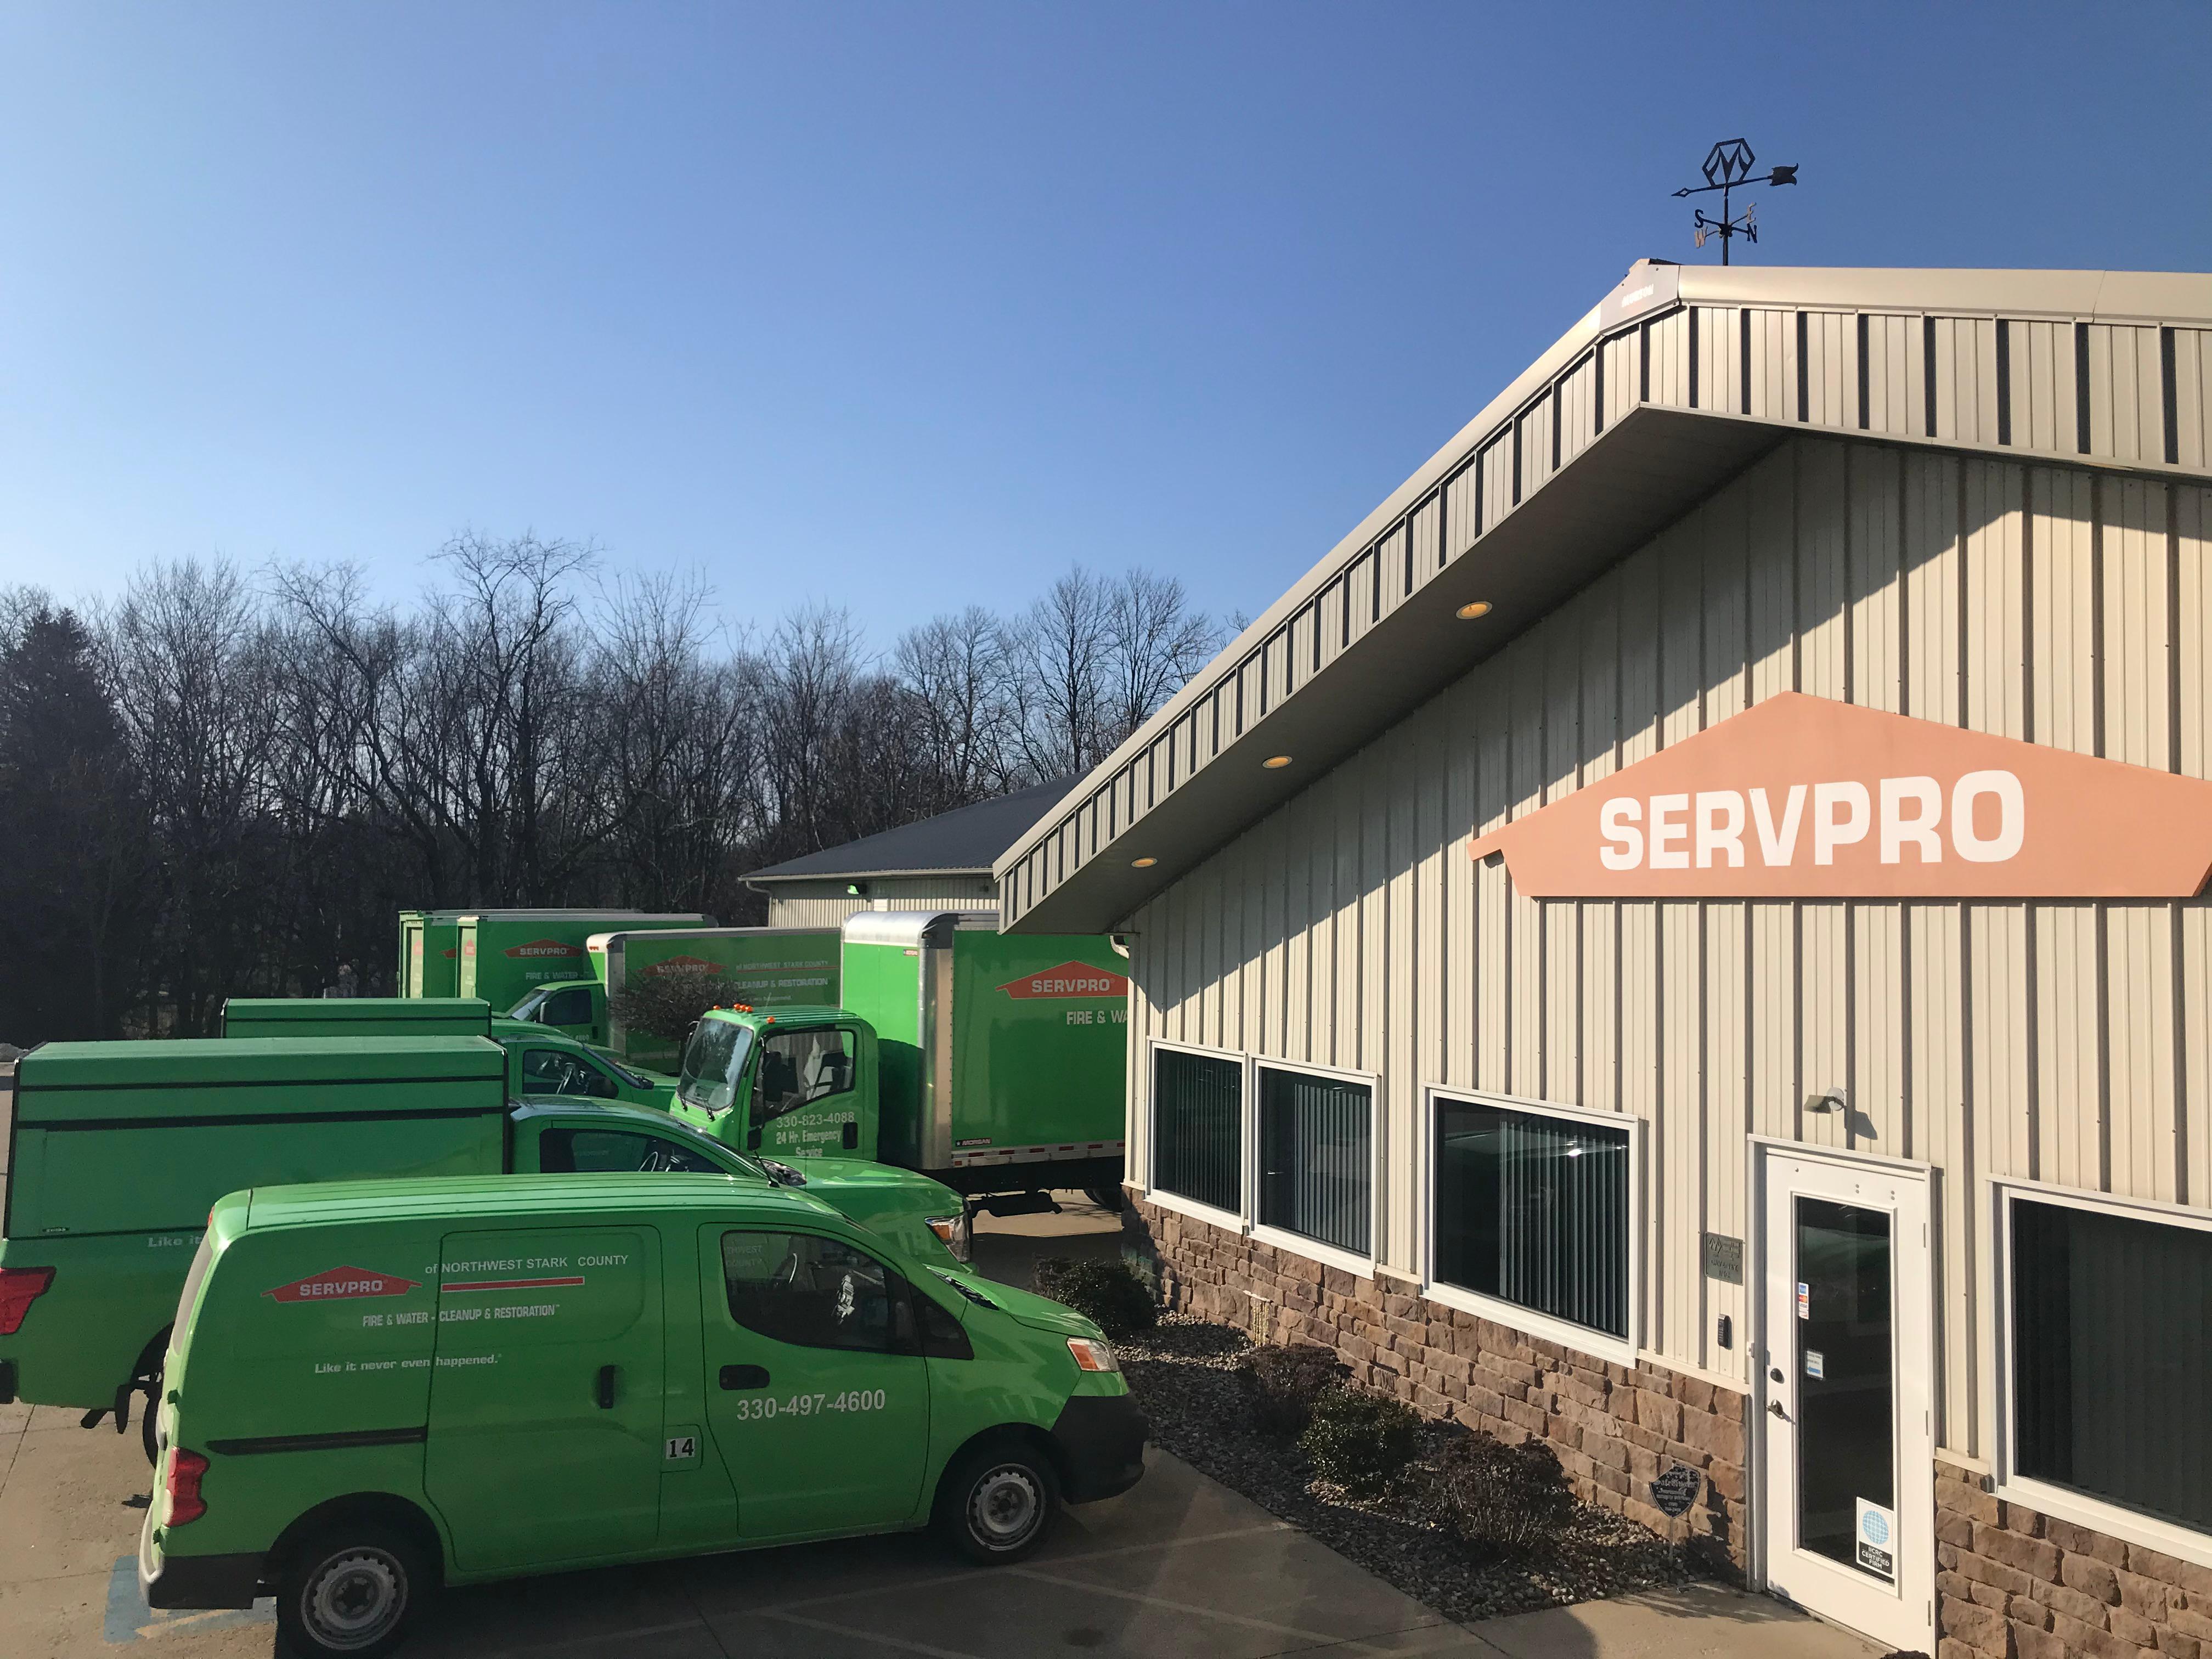 SERVPRO of Northwest Stark County Building and Trucks.